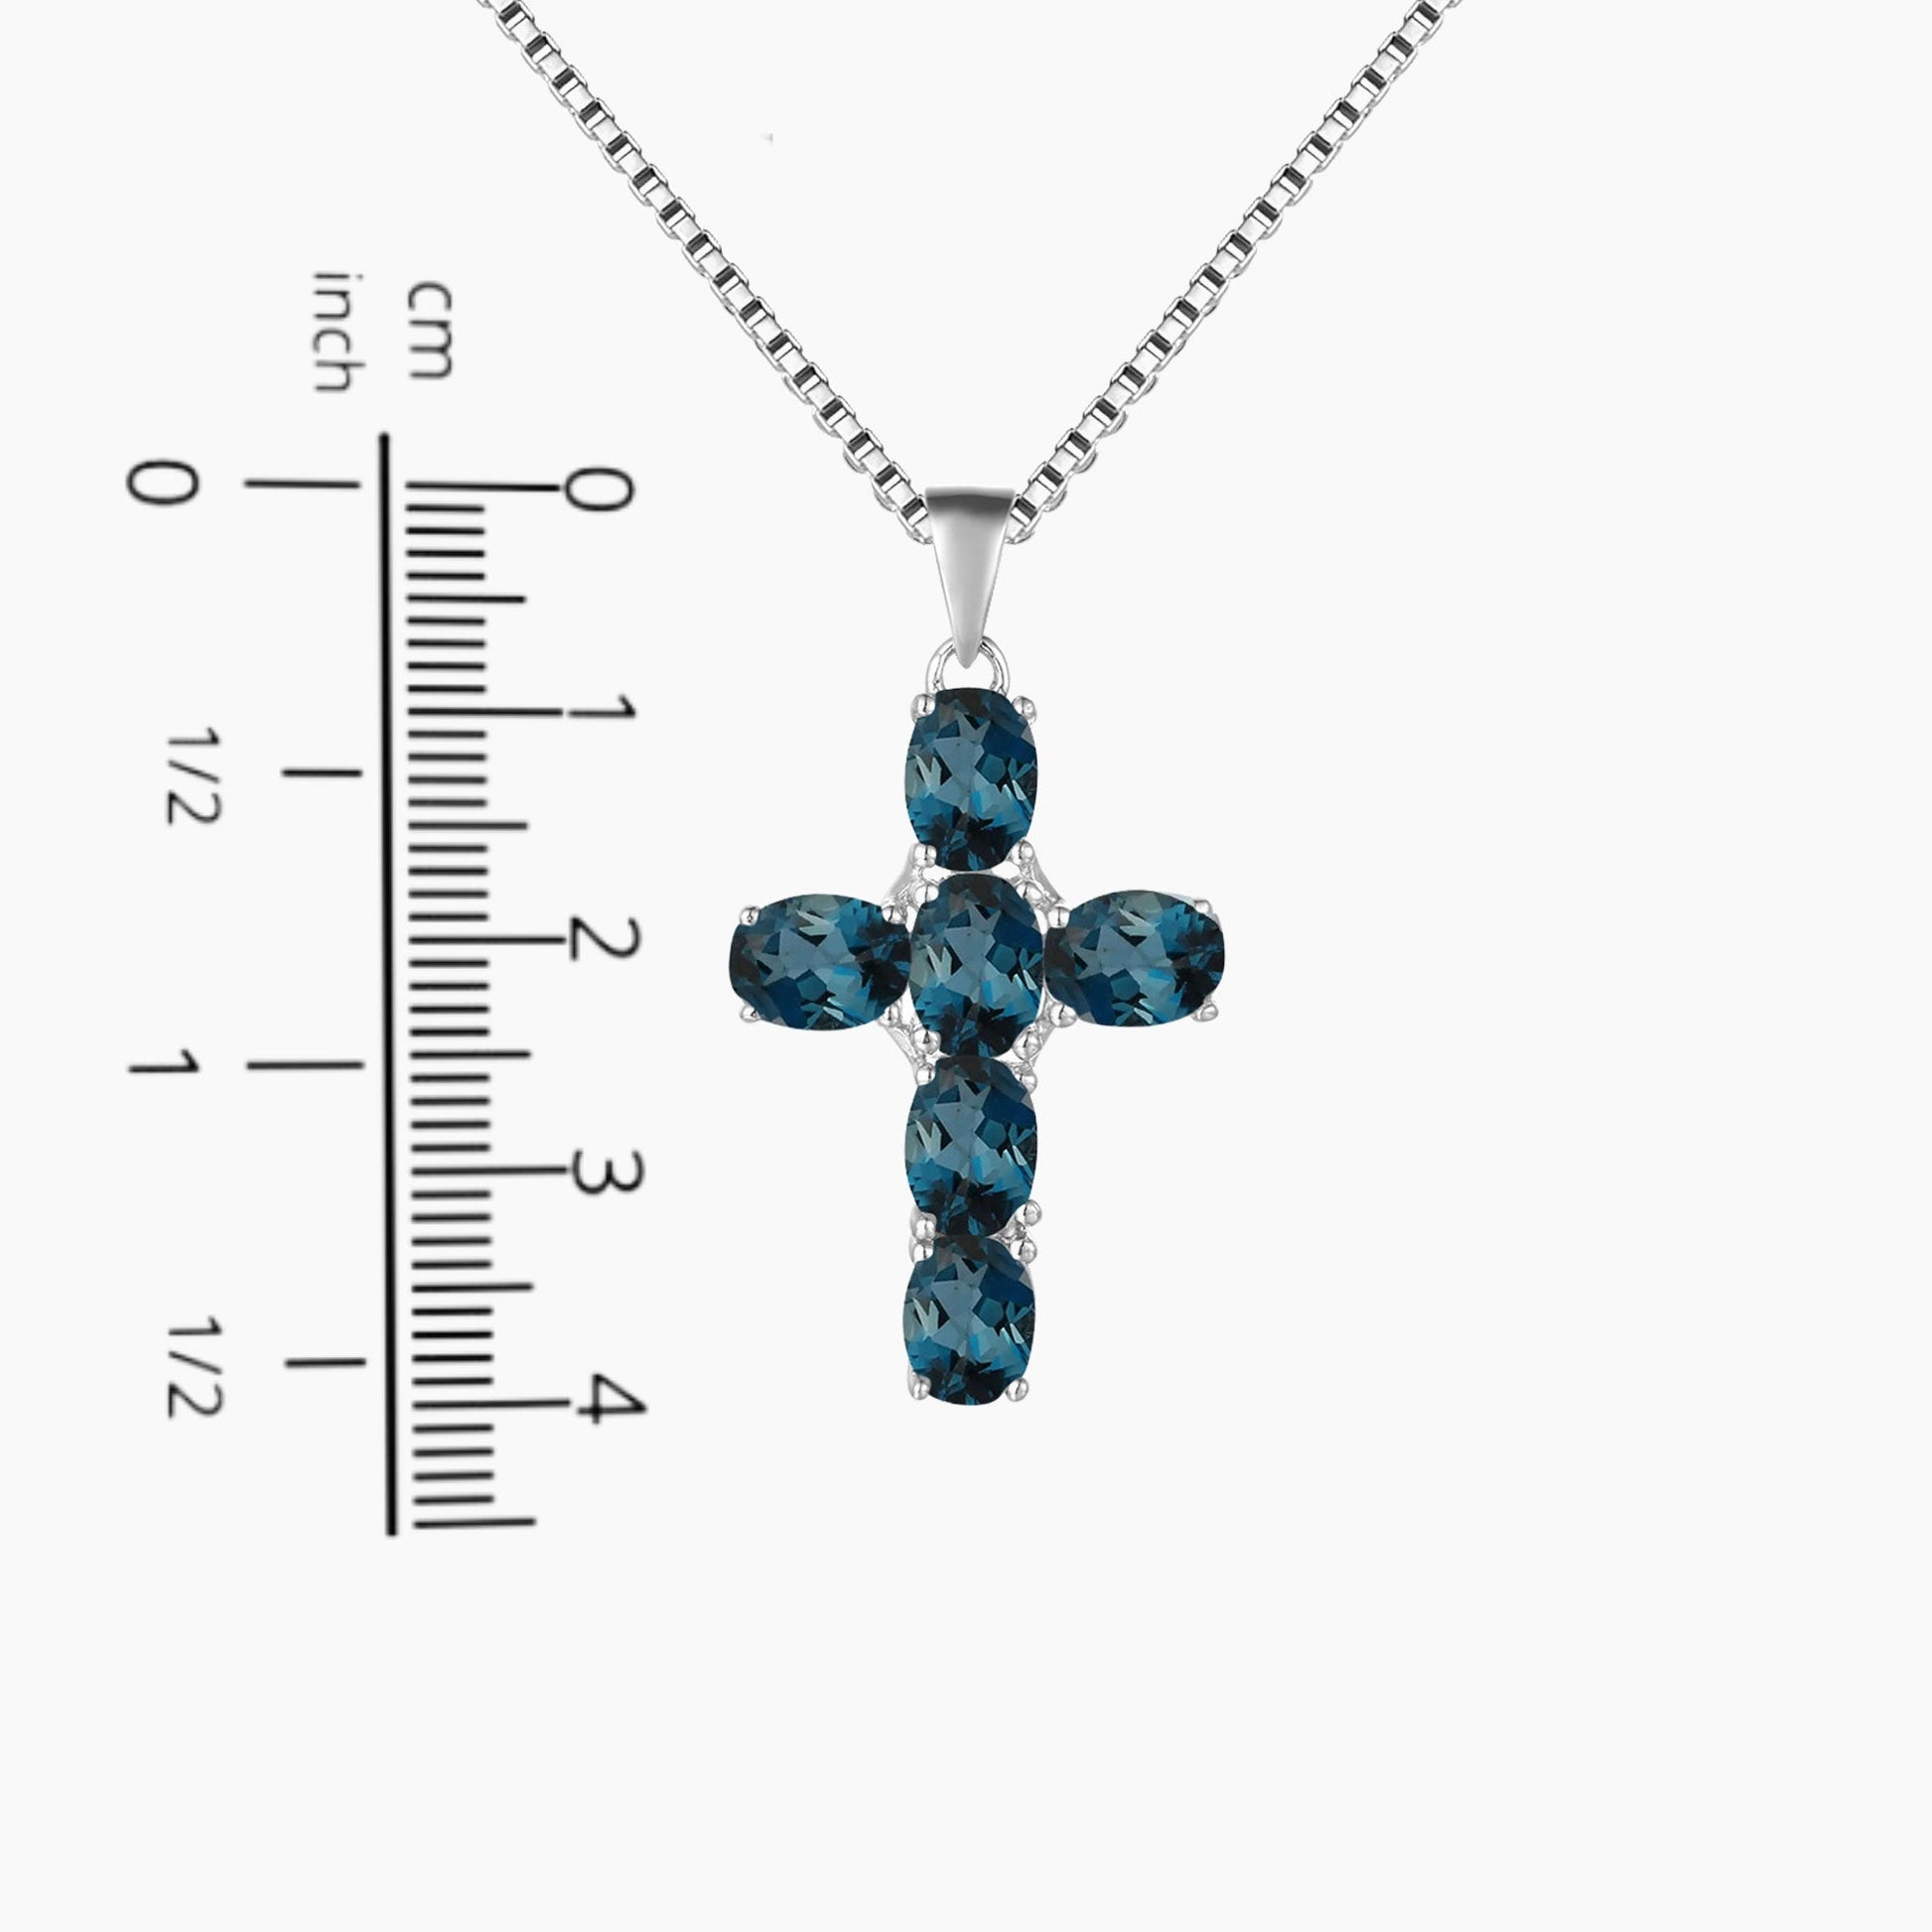 cross pendant next to a scale